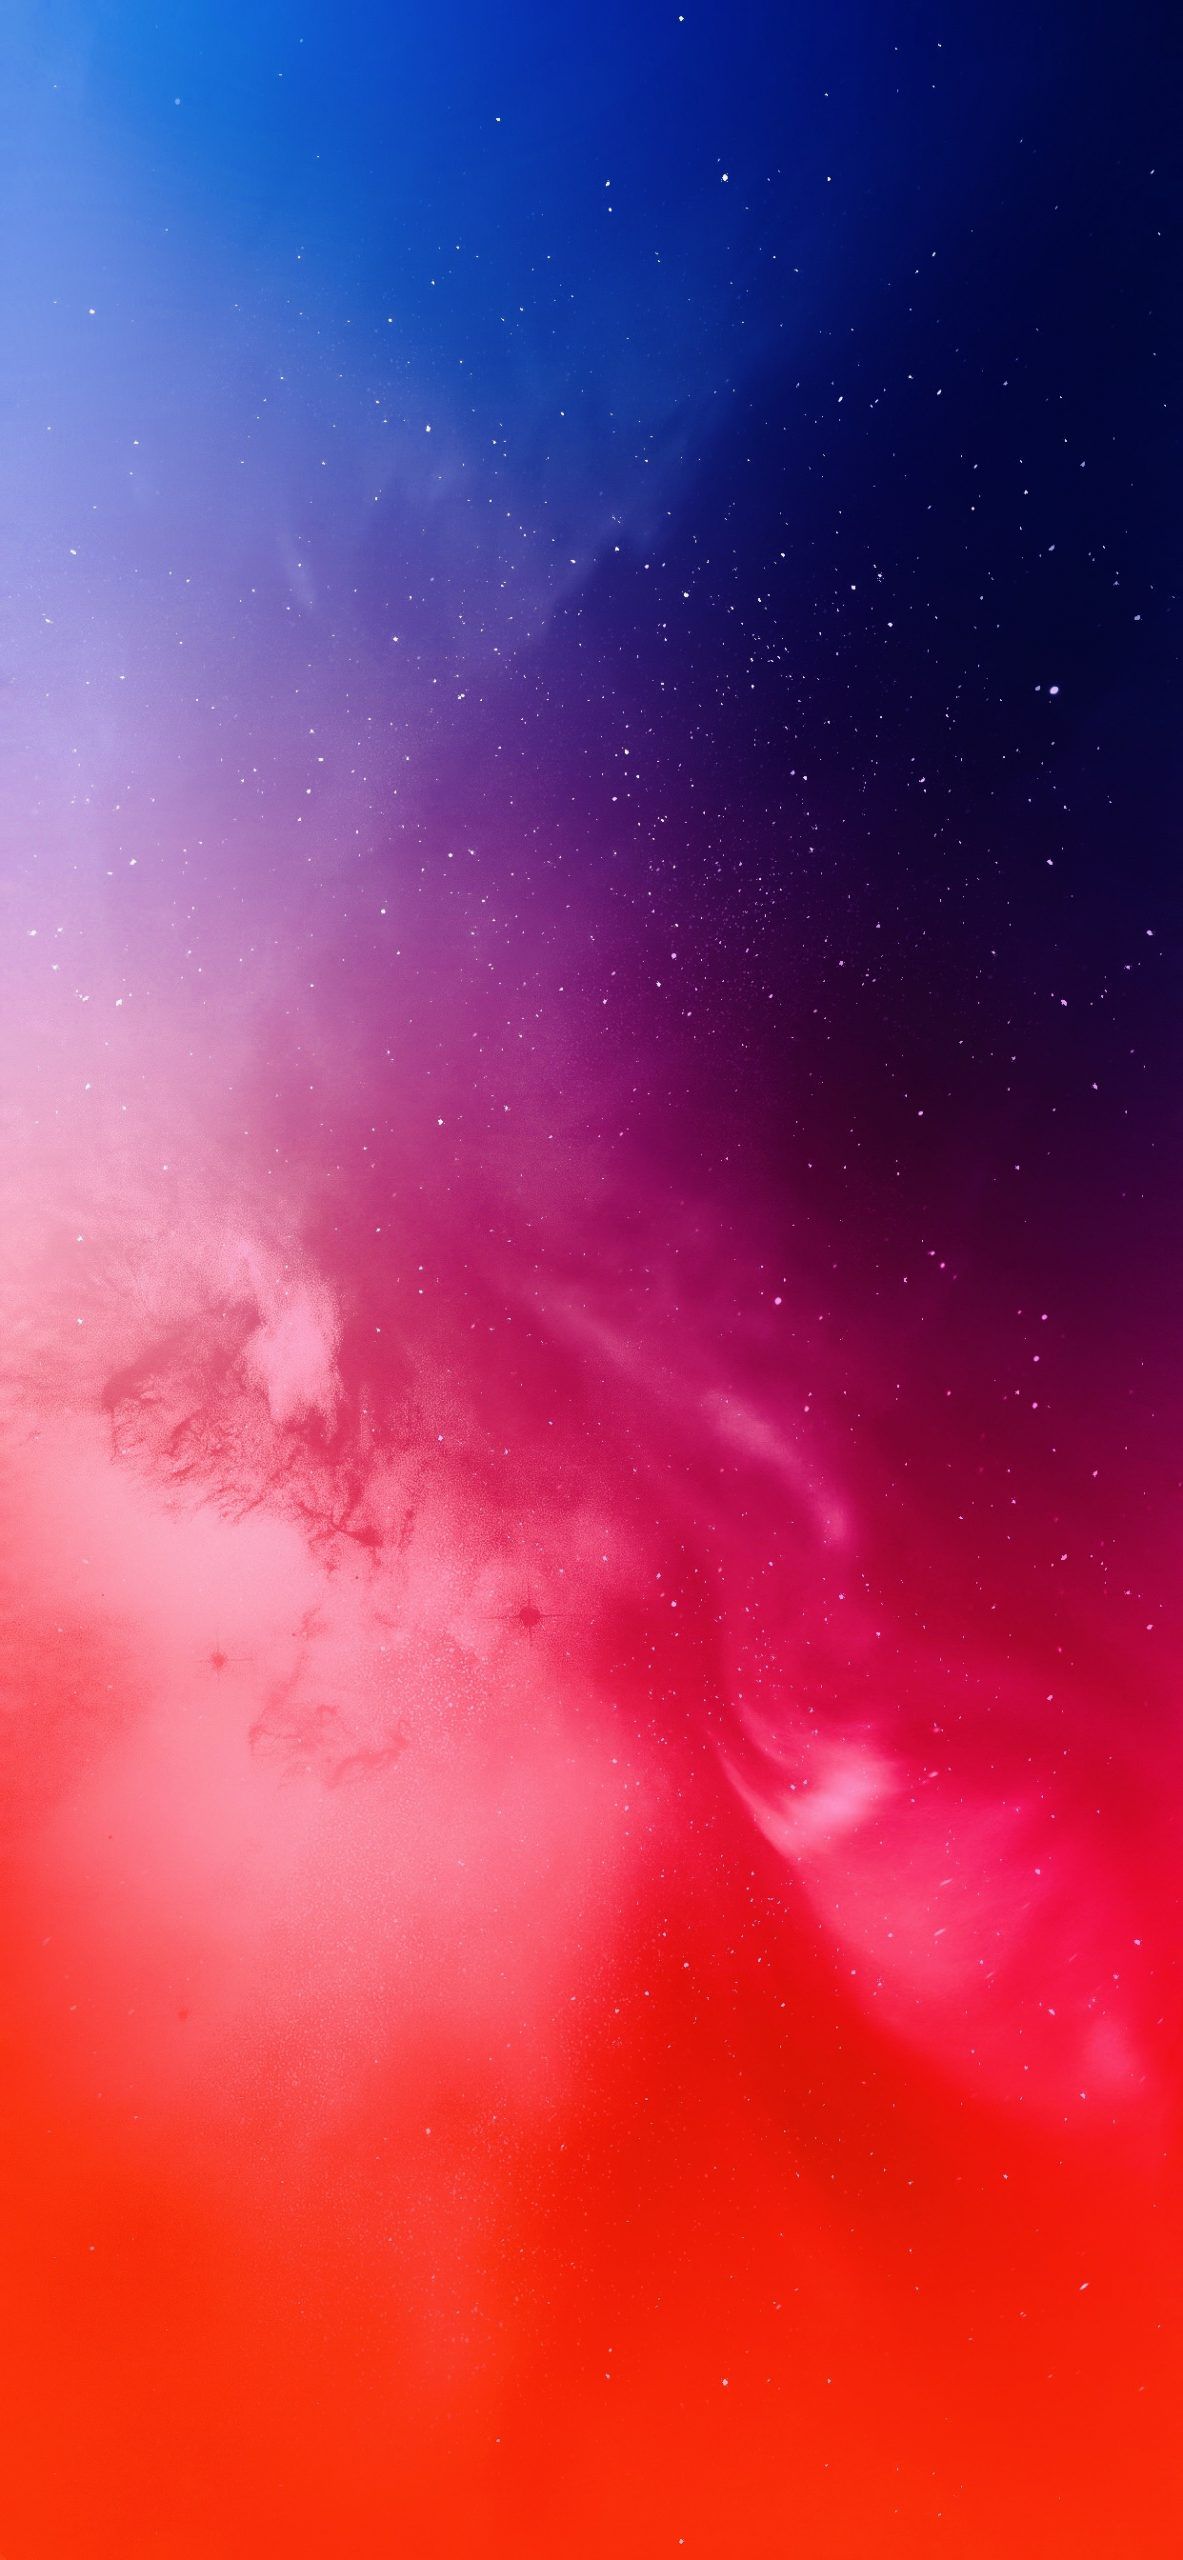 Space fantasy wallpaper for iPhone